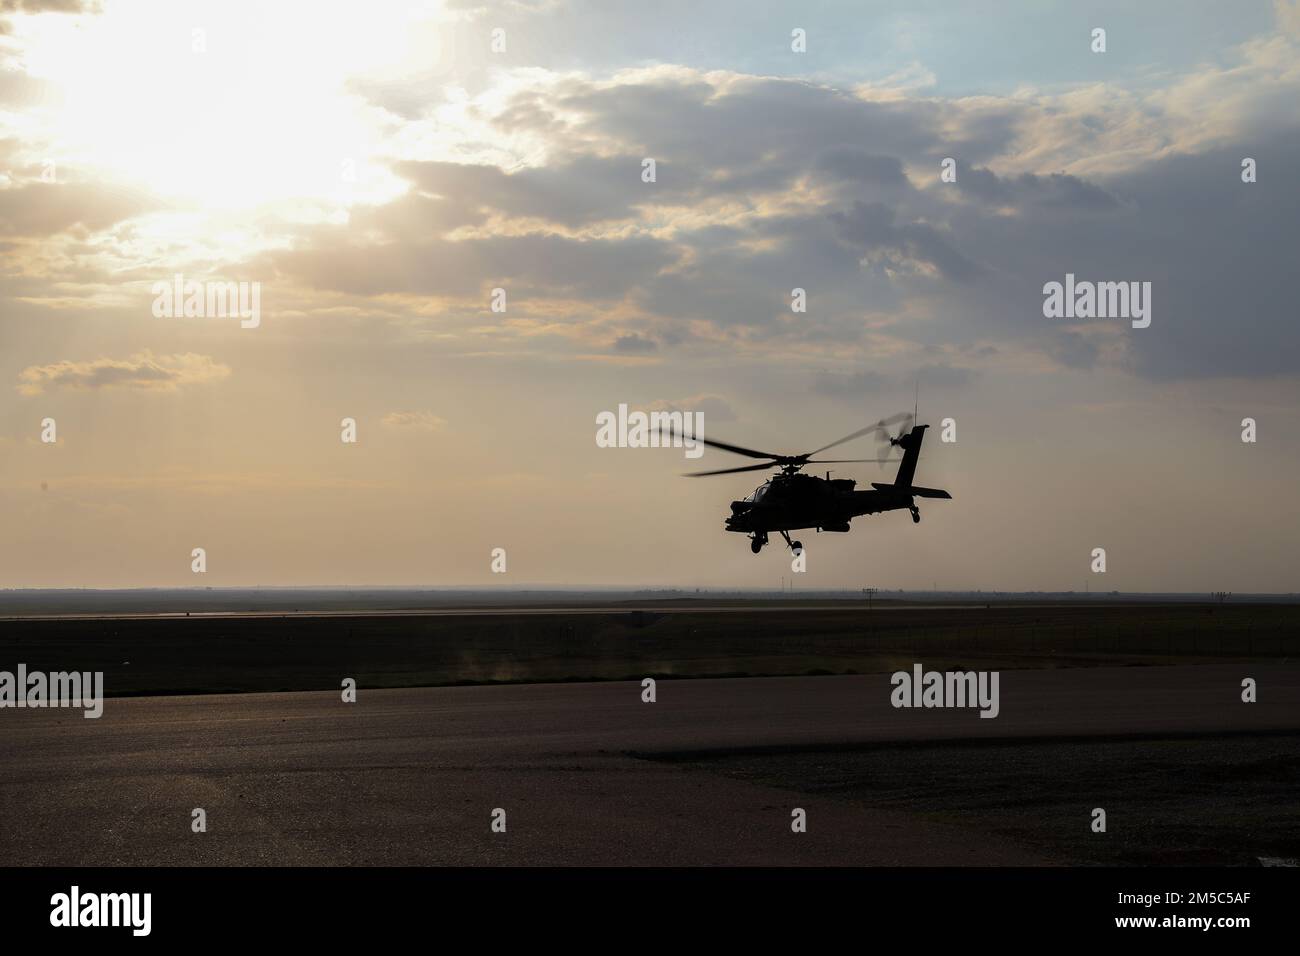 A U.S. Army AH-64 Apache, with 1st “Attack” Battalion, 227th Aviation Regiment, 11th Combat Aviation Brigade (CAB) hovers over a tarmac before a mission in the U.S. Central Command area of operations, Feb. 27, 2022. 11th CAB, mobilized as Task Force Eagle, is deployed in support of the Combined Joint Task Force – Operation Inherent Resolve mission to advise, assist and enable partnered forces in the enduring defeat of Da’esh, the common Arabic term for IS or ISIS, within designated areas of Iraq and Syria. Stock Photo